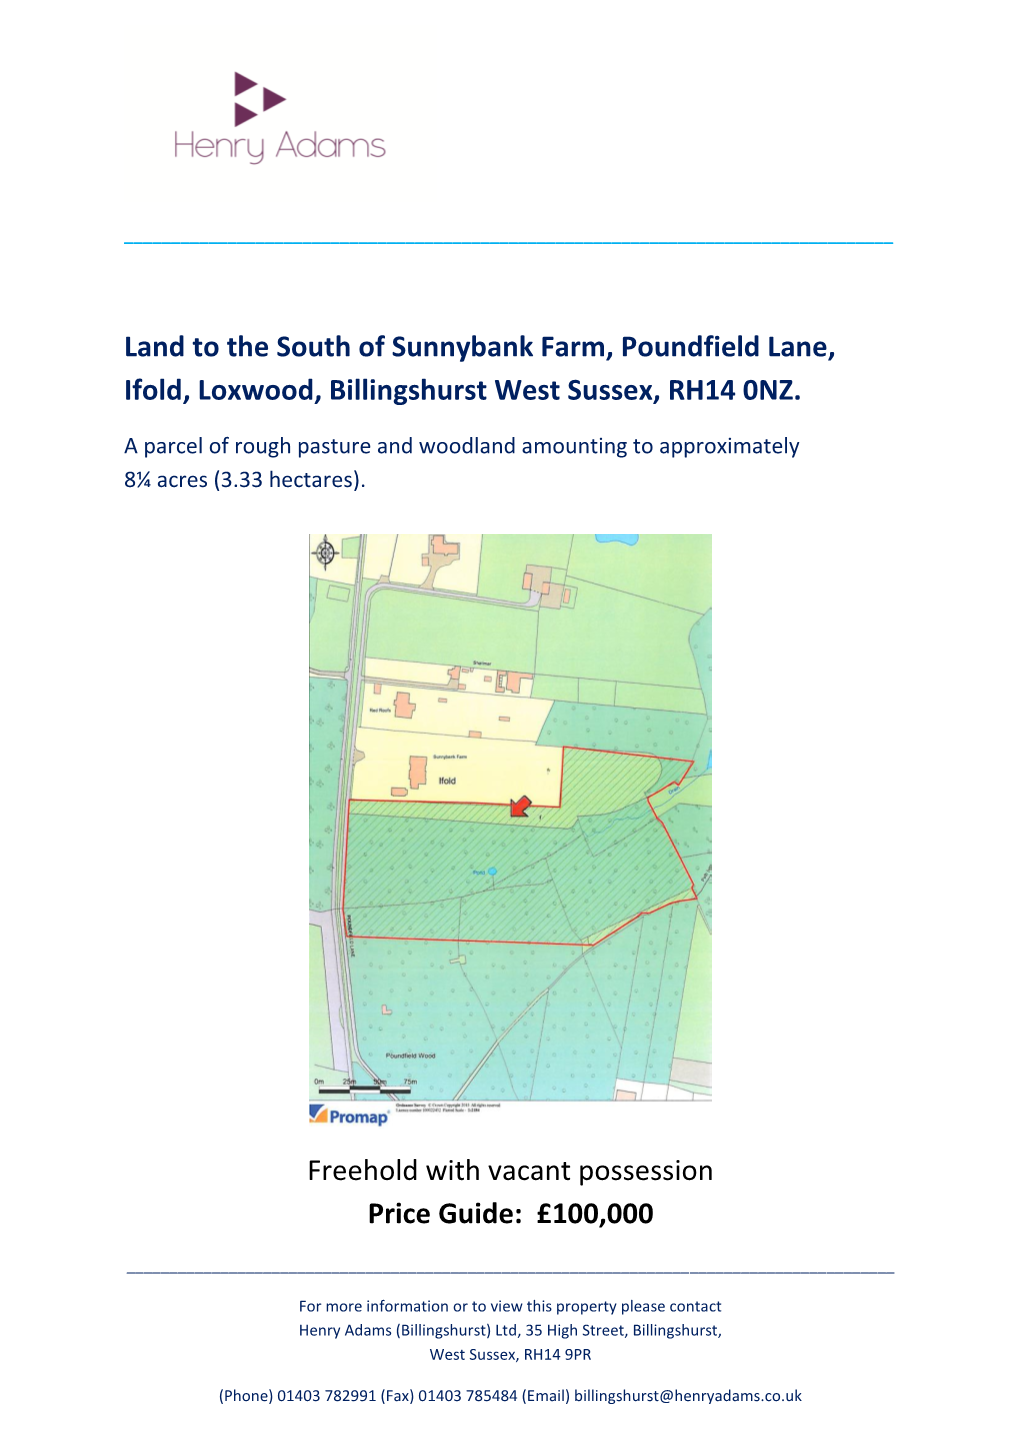 Land to the South of Sunnybank Farm, Poundfield Lane, Ifold, Loxwood, Billingshurst West Sussex, RH14 0NZ